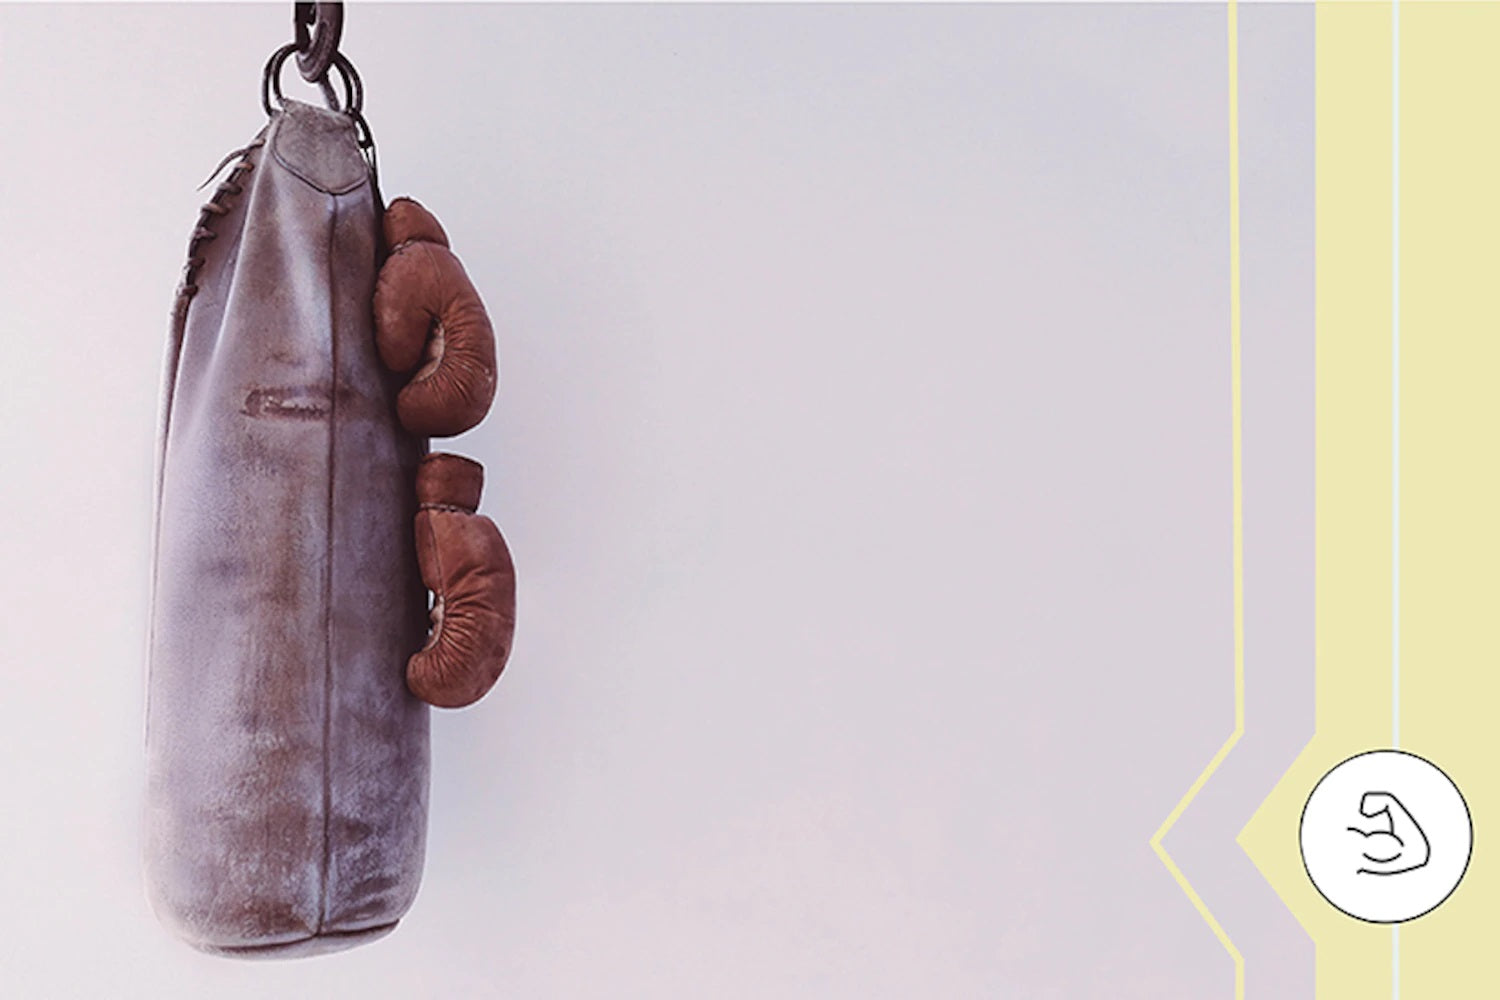 old boxing bag and gloves hanging off 